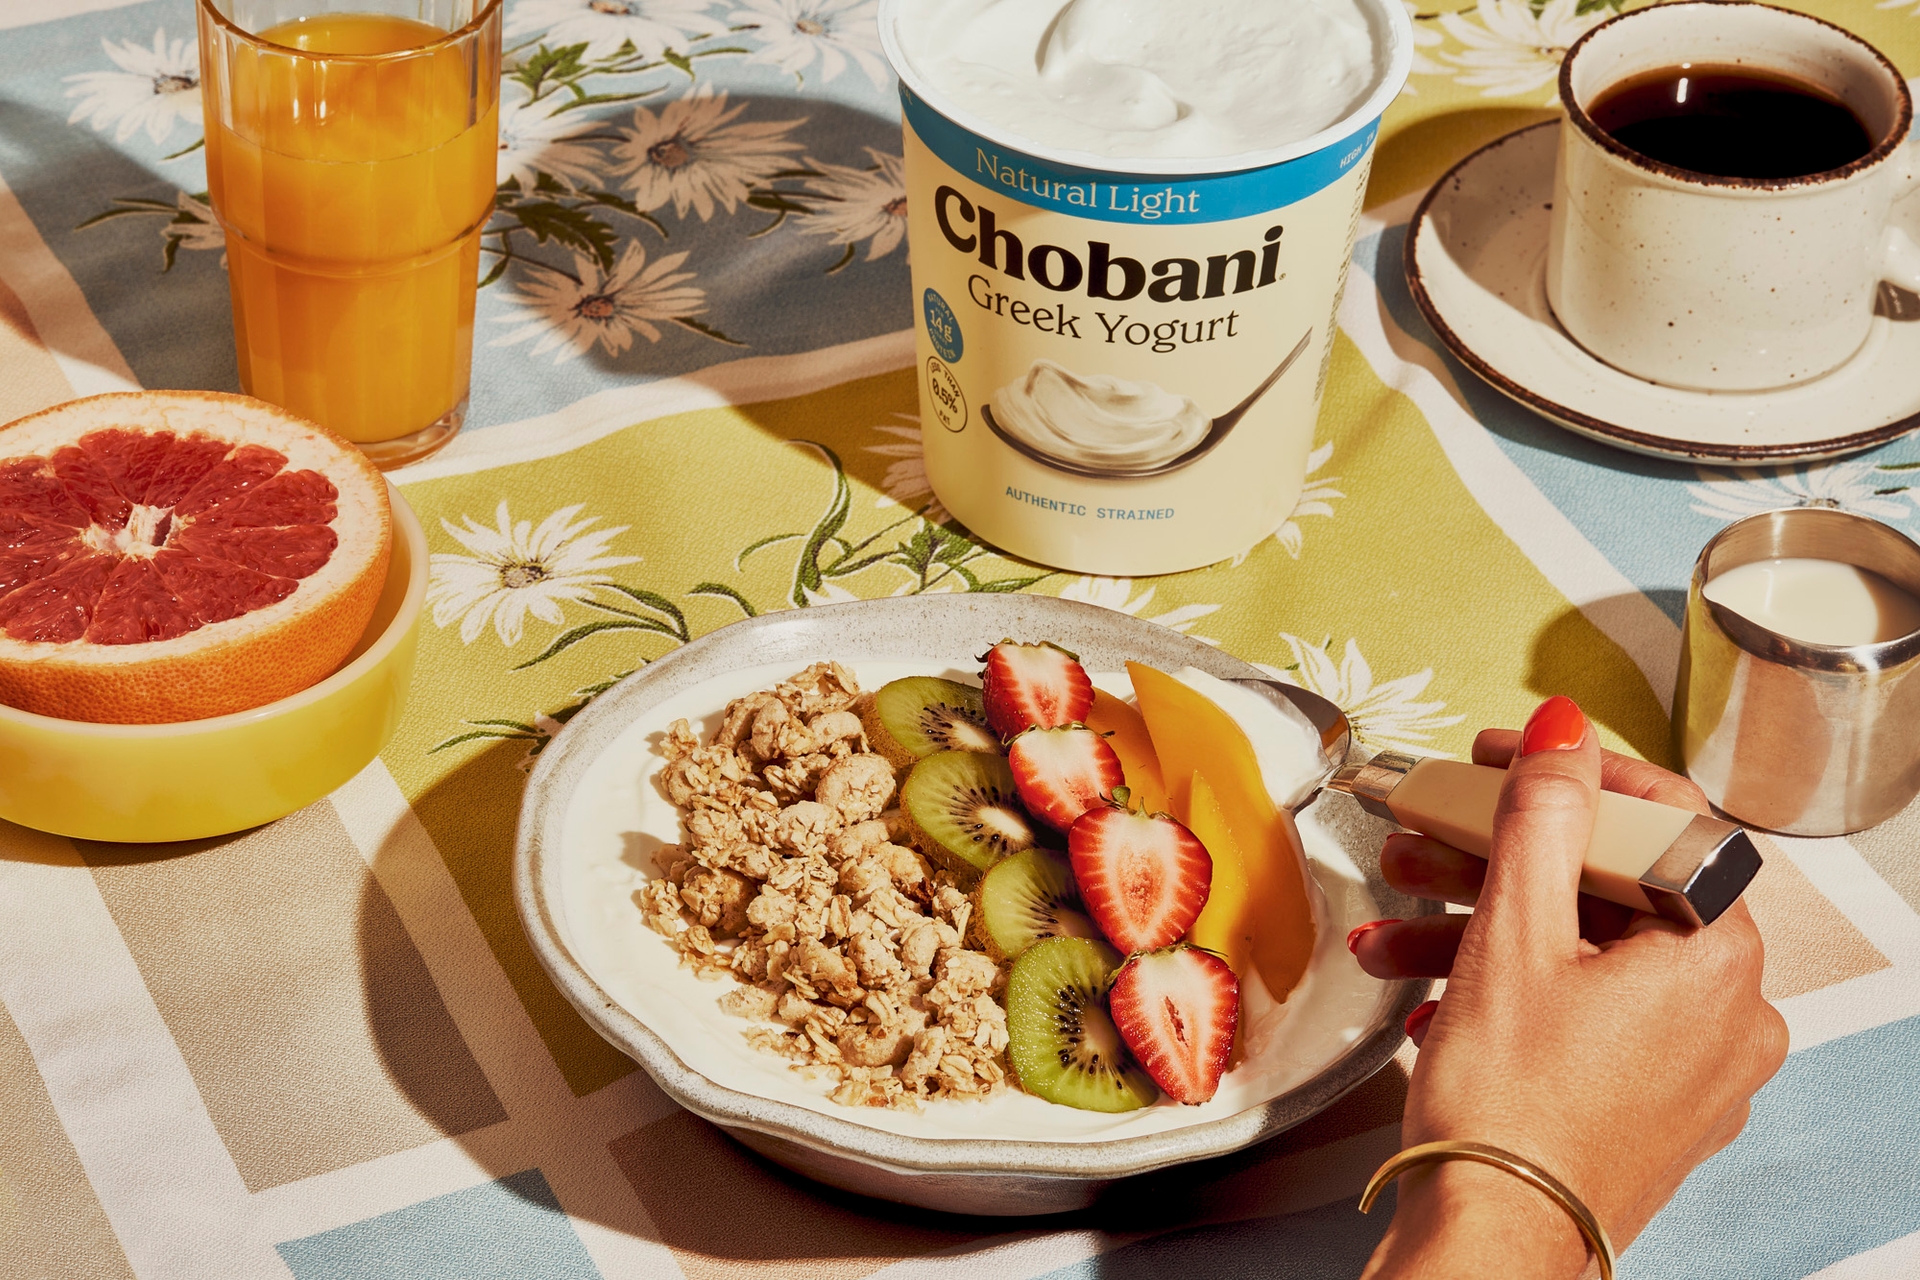 Why is packaging design important? Our Revolution describe their expertise and design work for Chobani